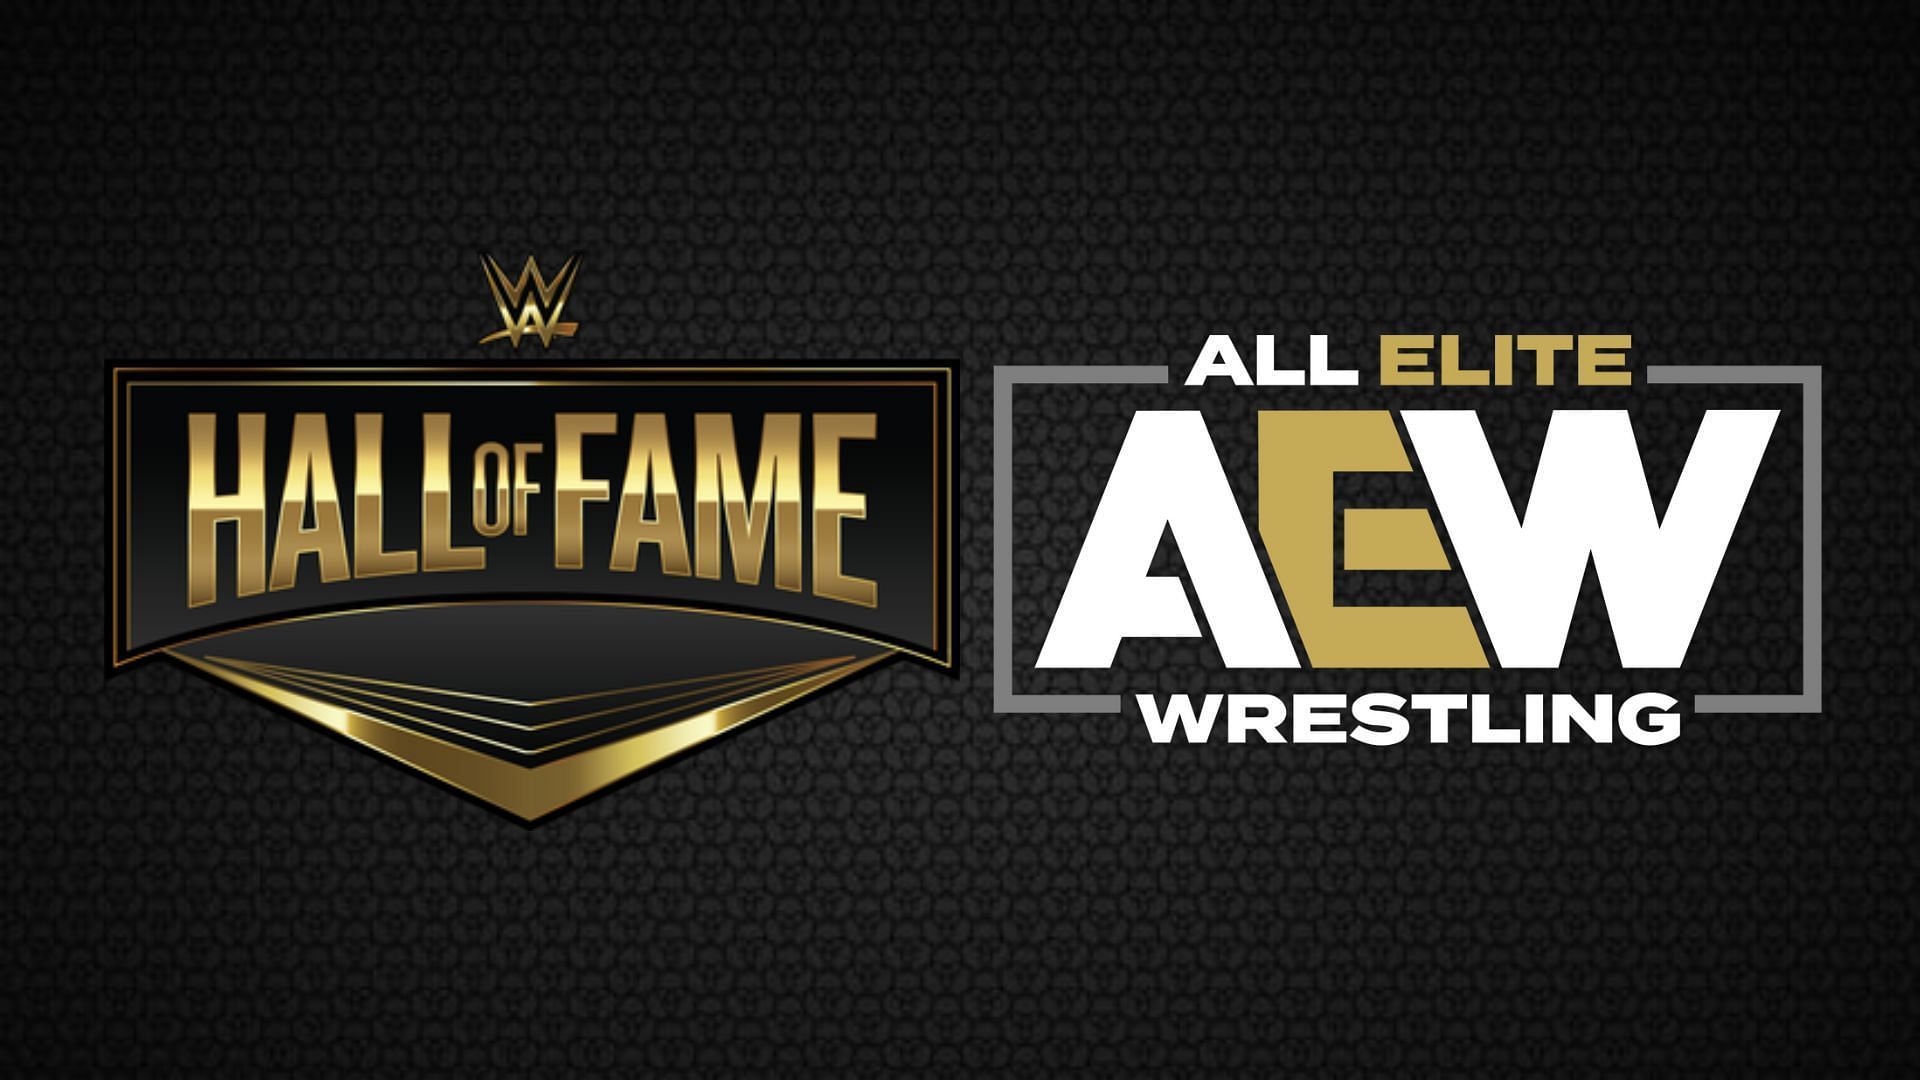 A WWE Hall of Famer could debut in AEW soon.